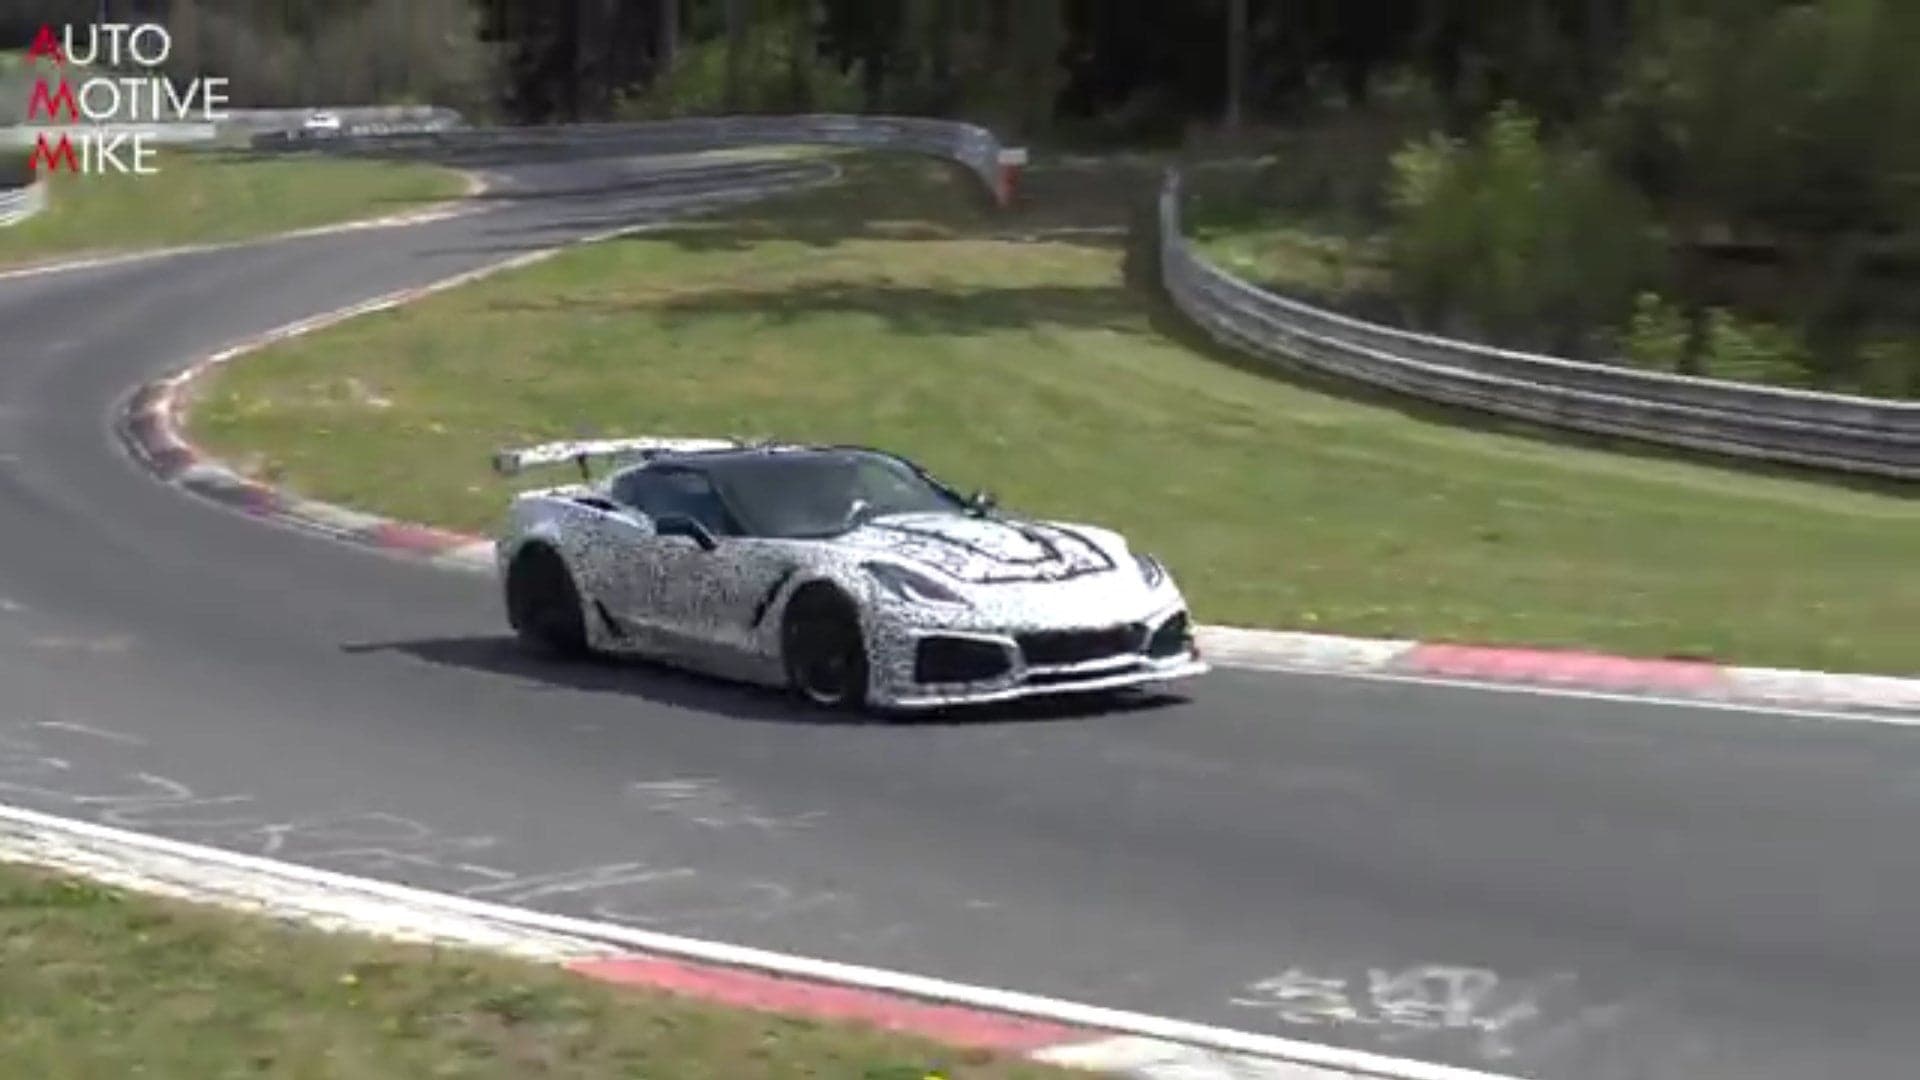 Is This the 2018 Chevy Corvette ZR1 Going for a Nurburgring Lap Record?